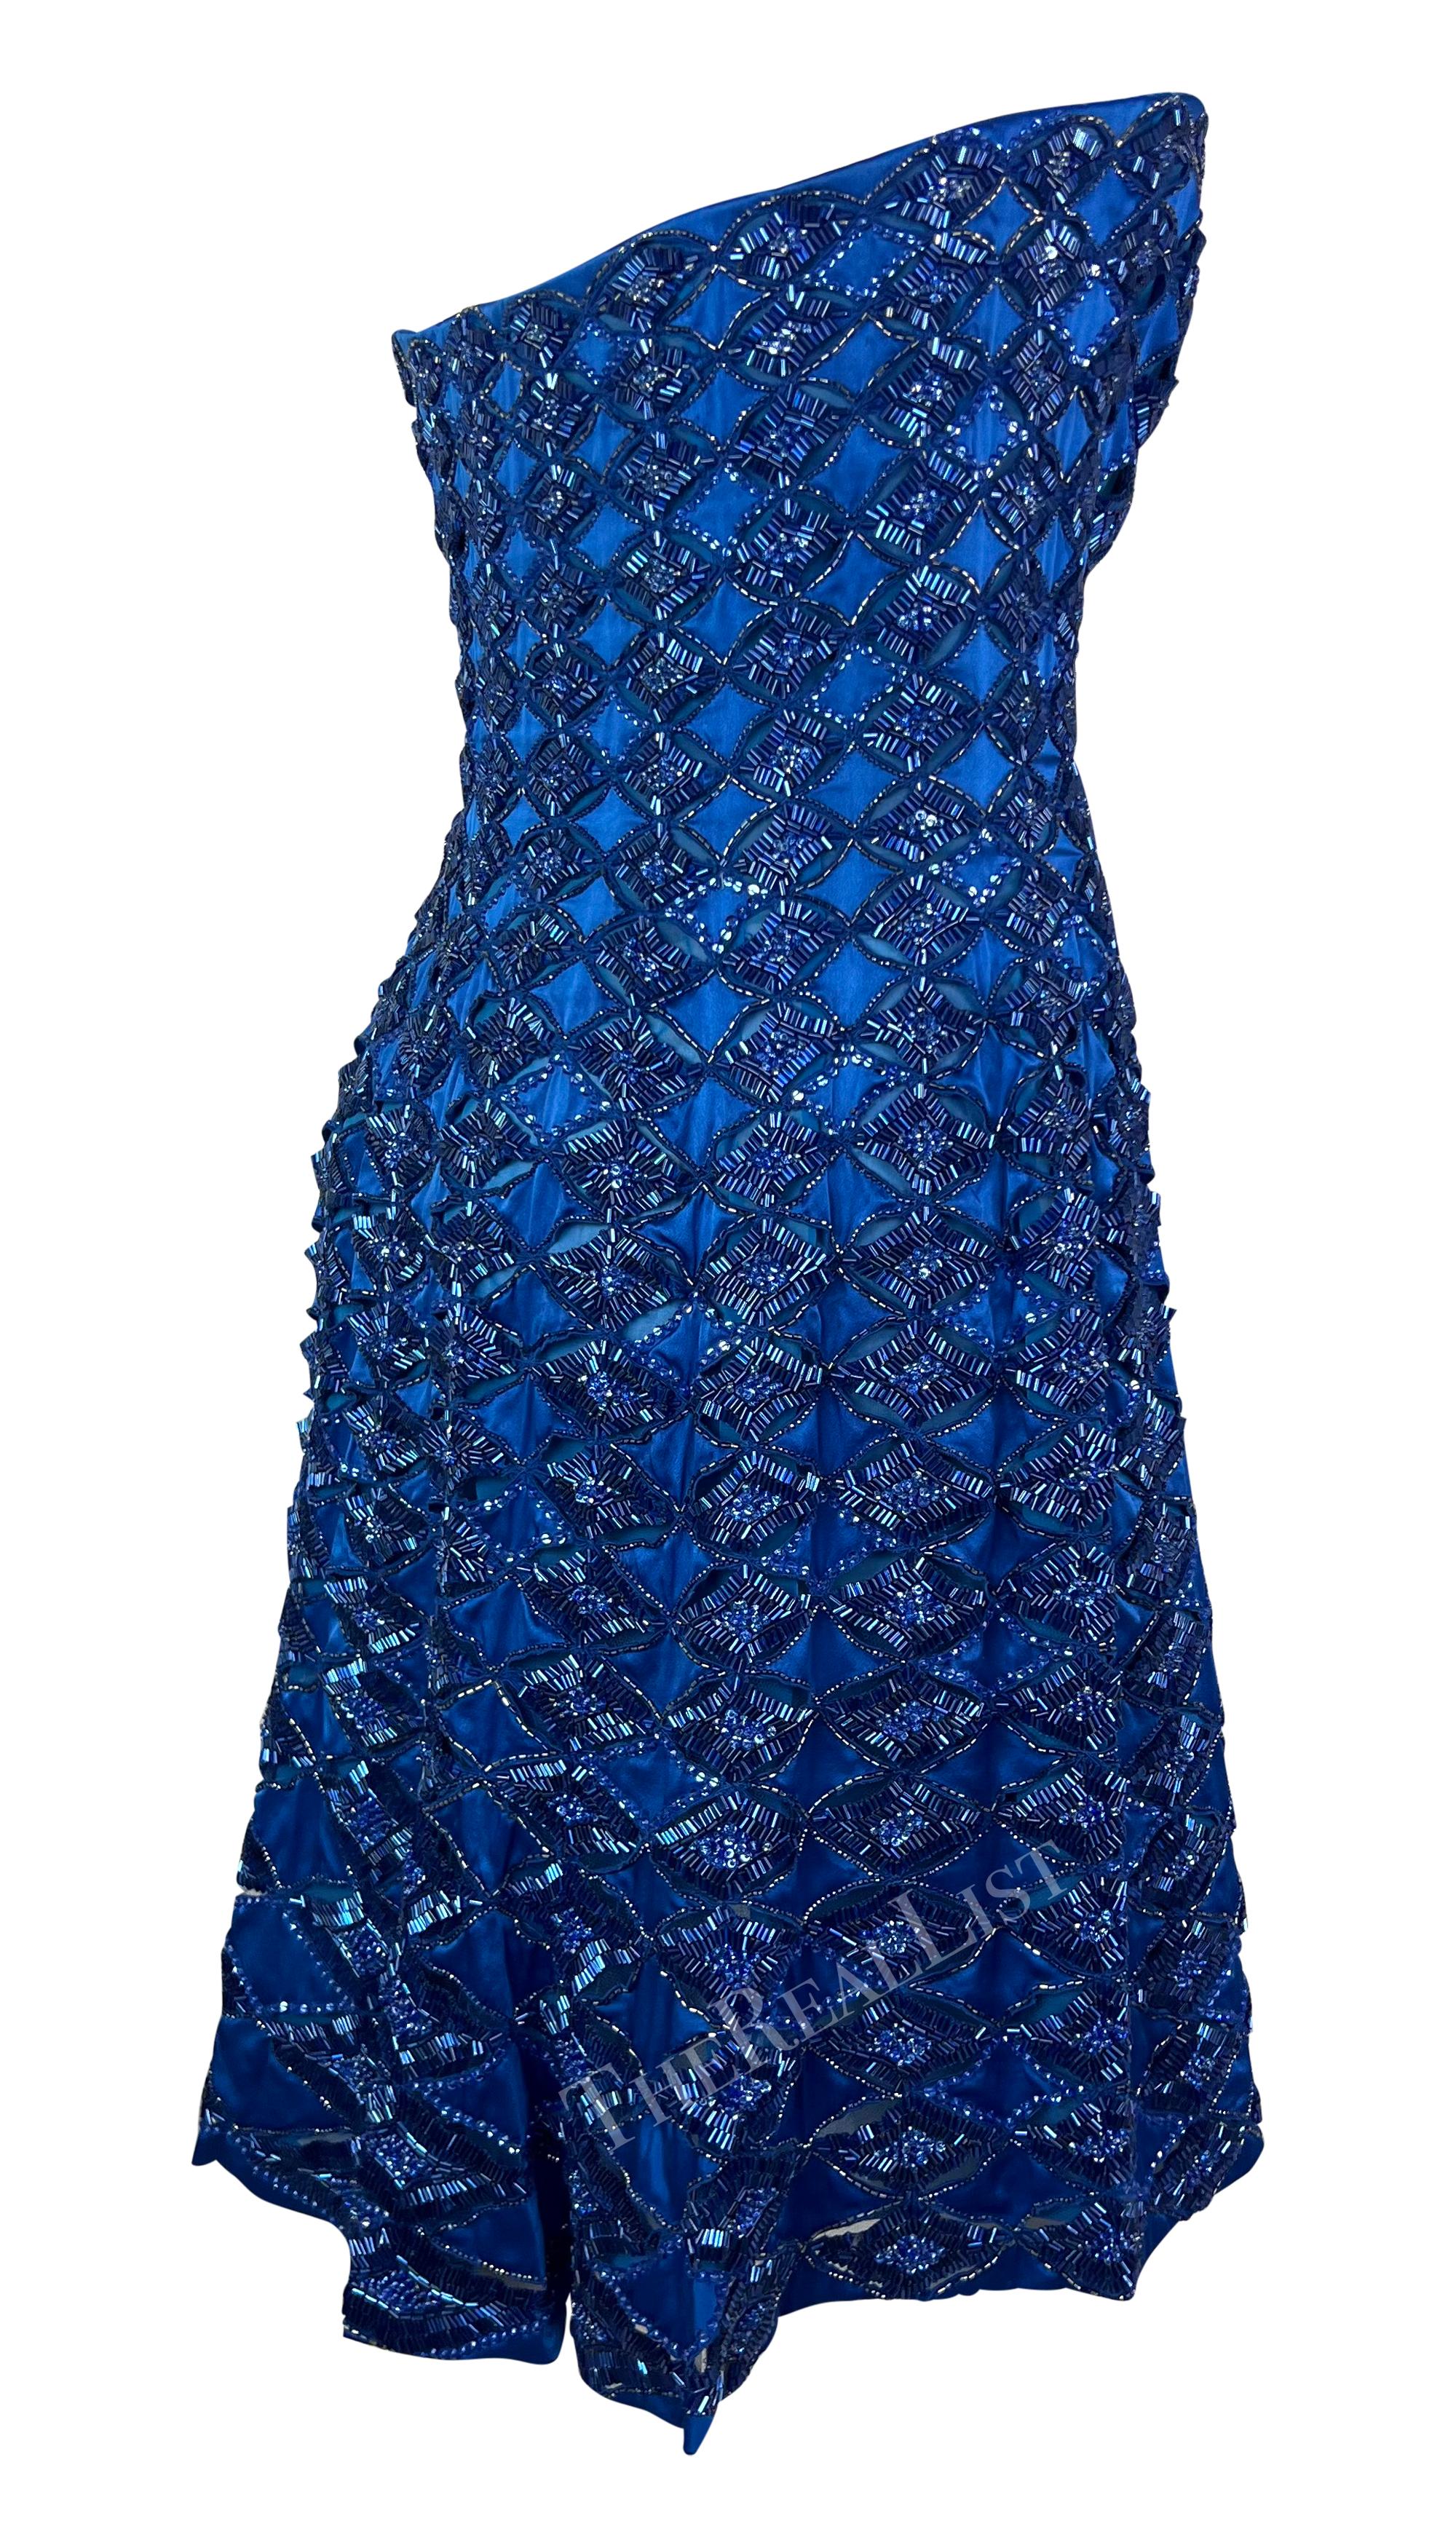 S/S 2001 Atelier Versace by Donatella Runway Blue Beaded Strapless Mini Dress For Sale 5